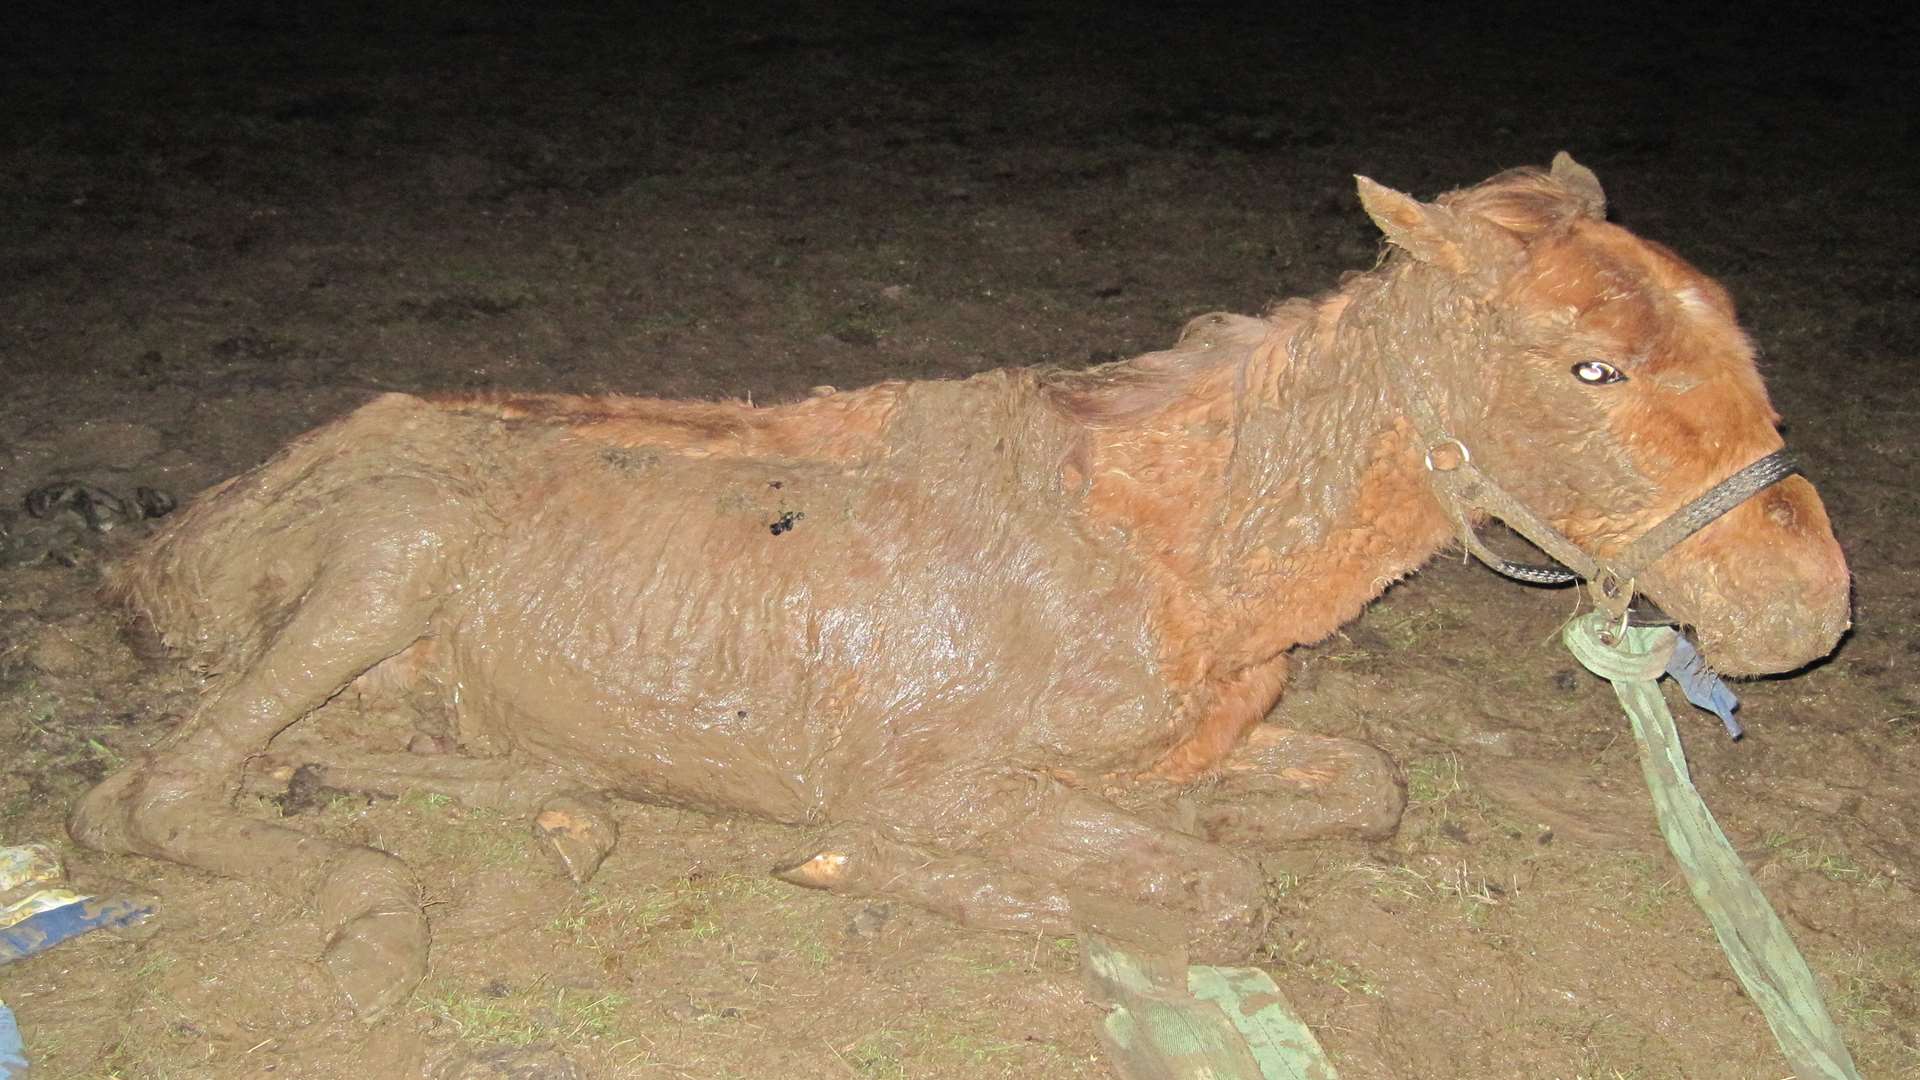 The horse was found to be incredibly skinny